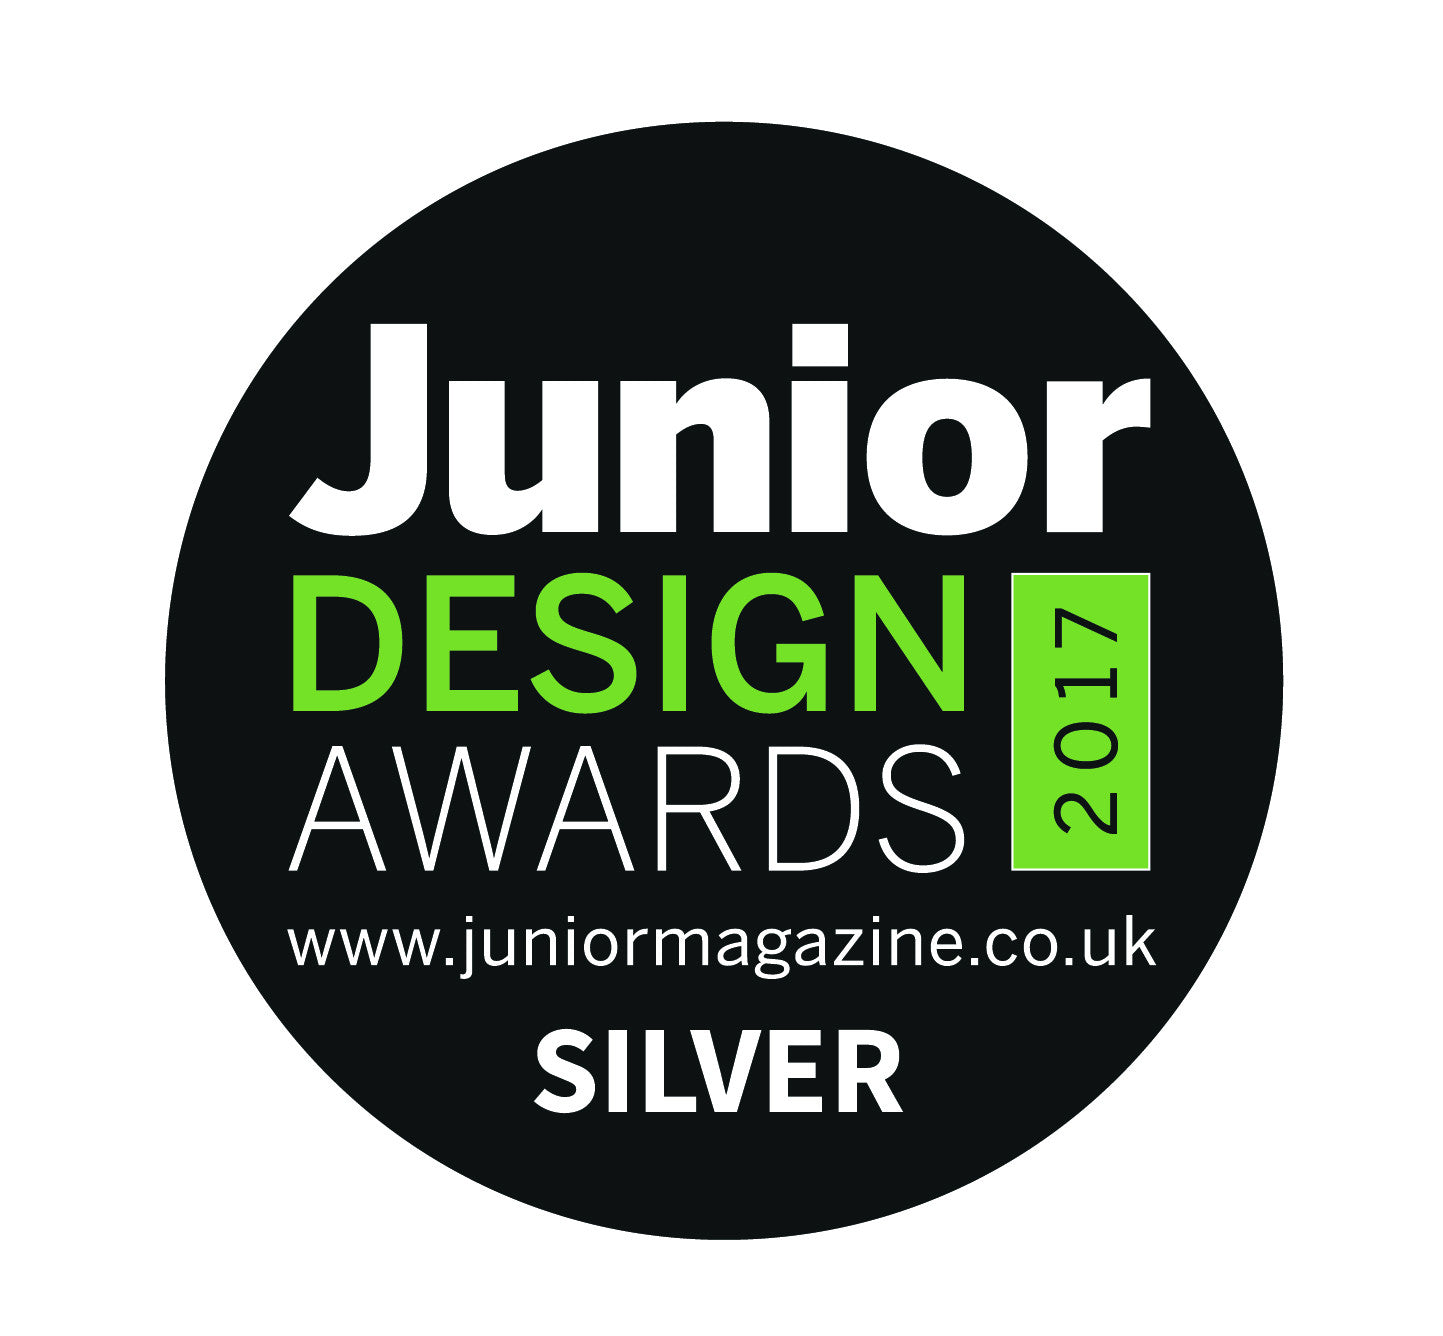 We only went and won a SILVER JUNIOR DESIGN AWARD....